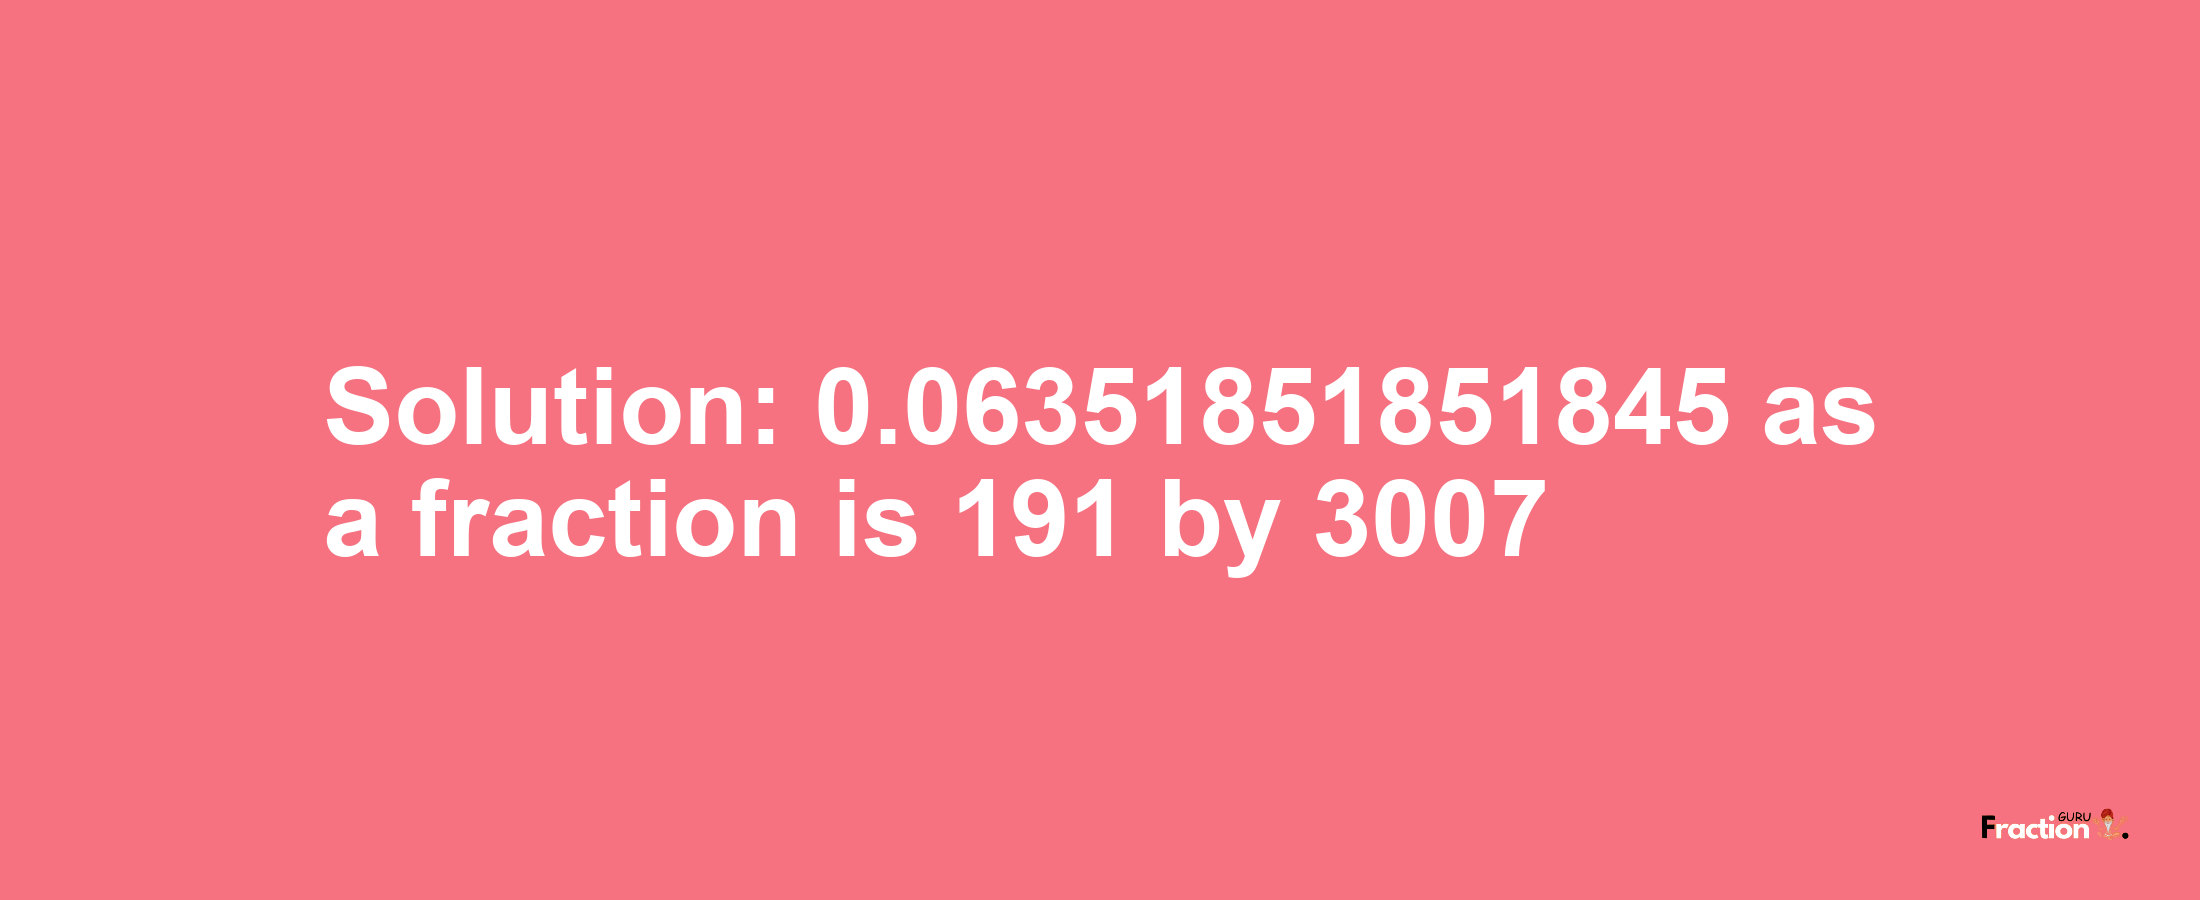 Solution:0.06351851851845 as a fraction is 191/3007